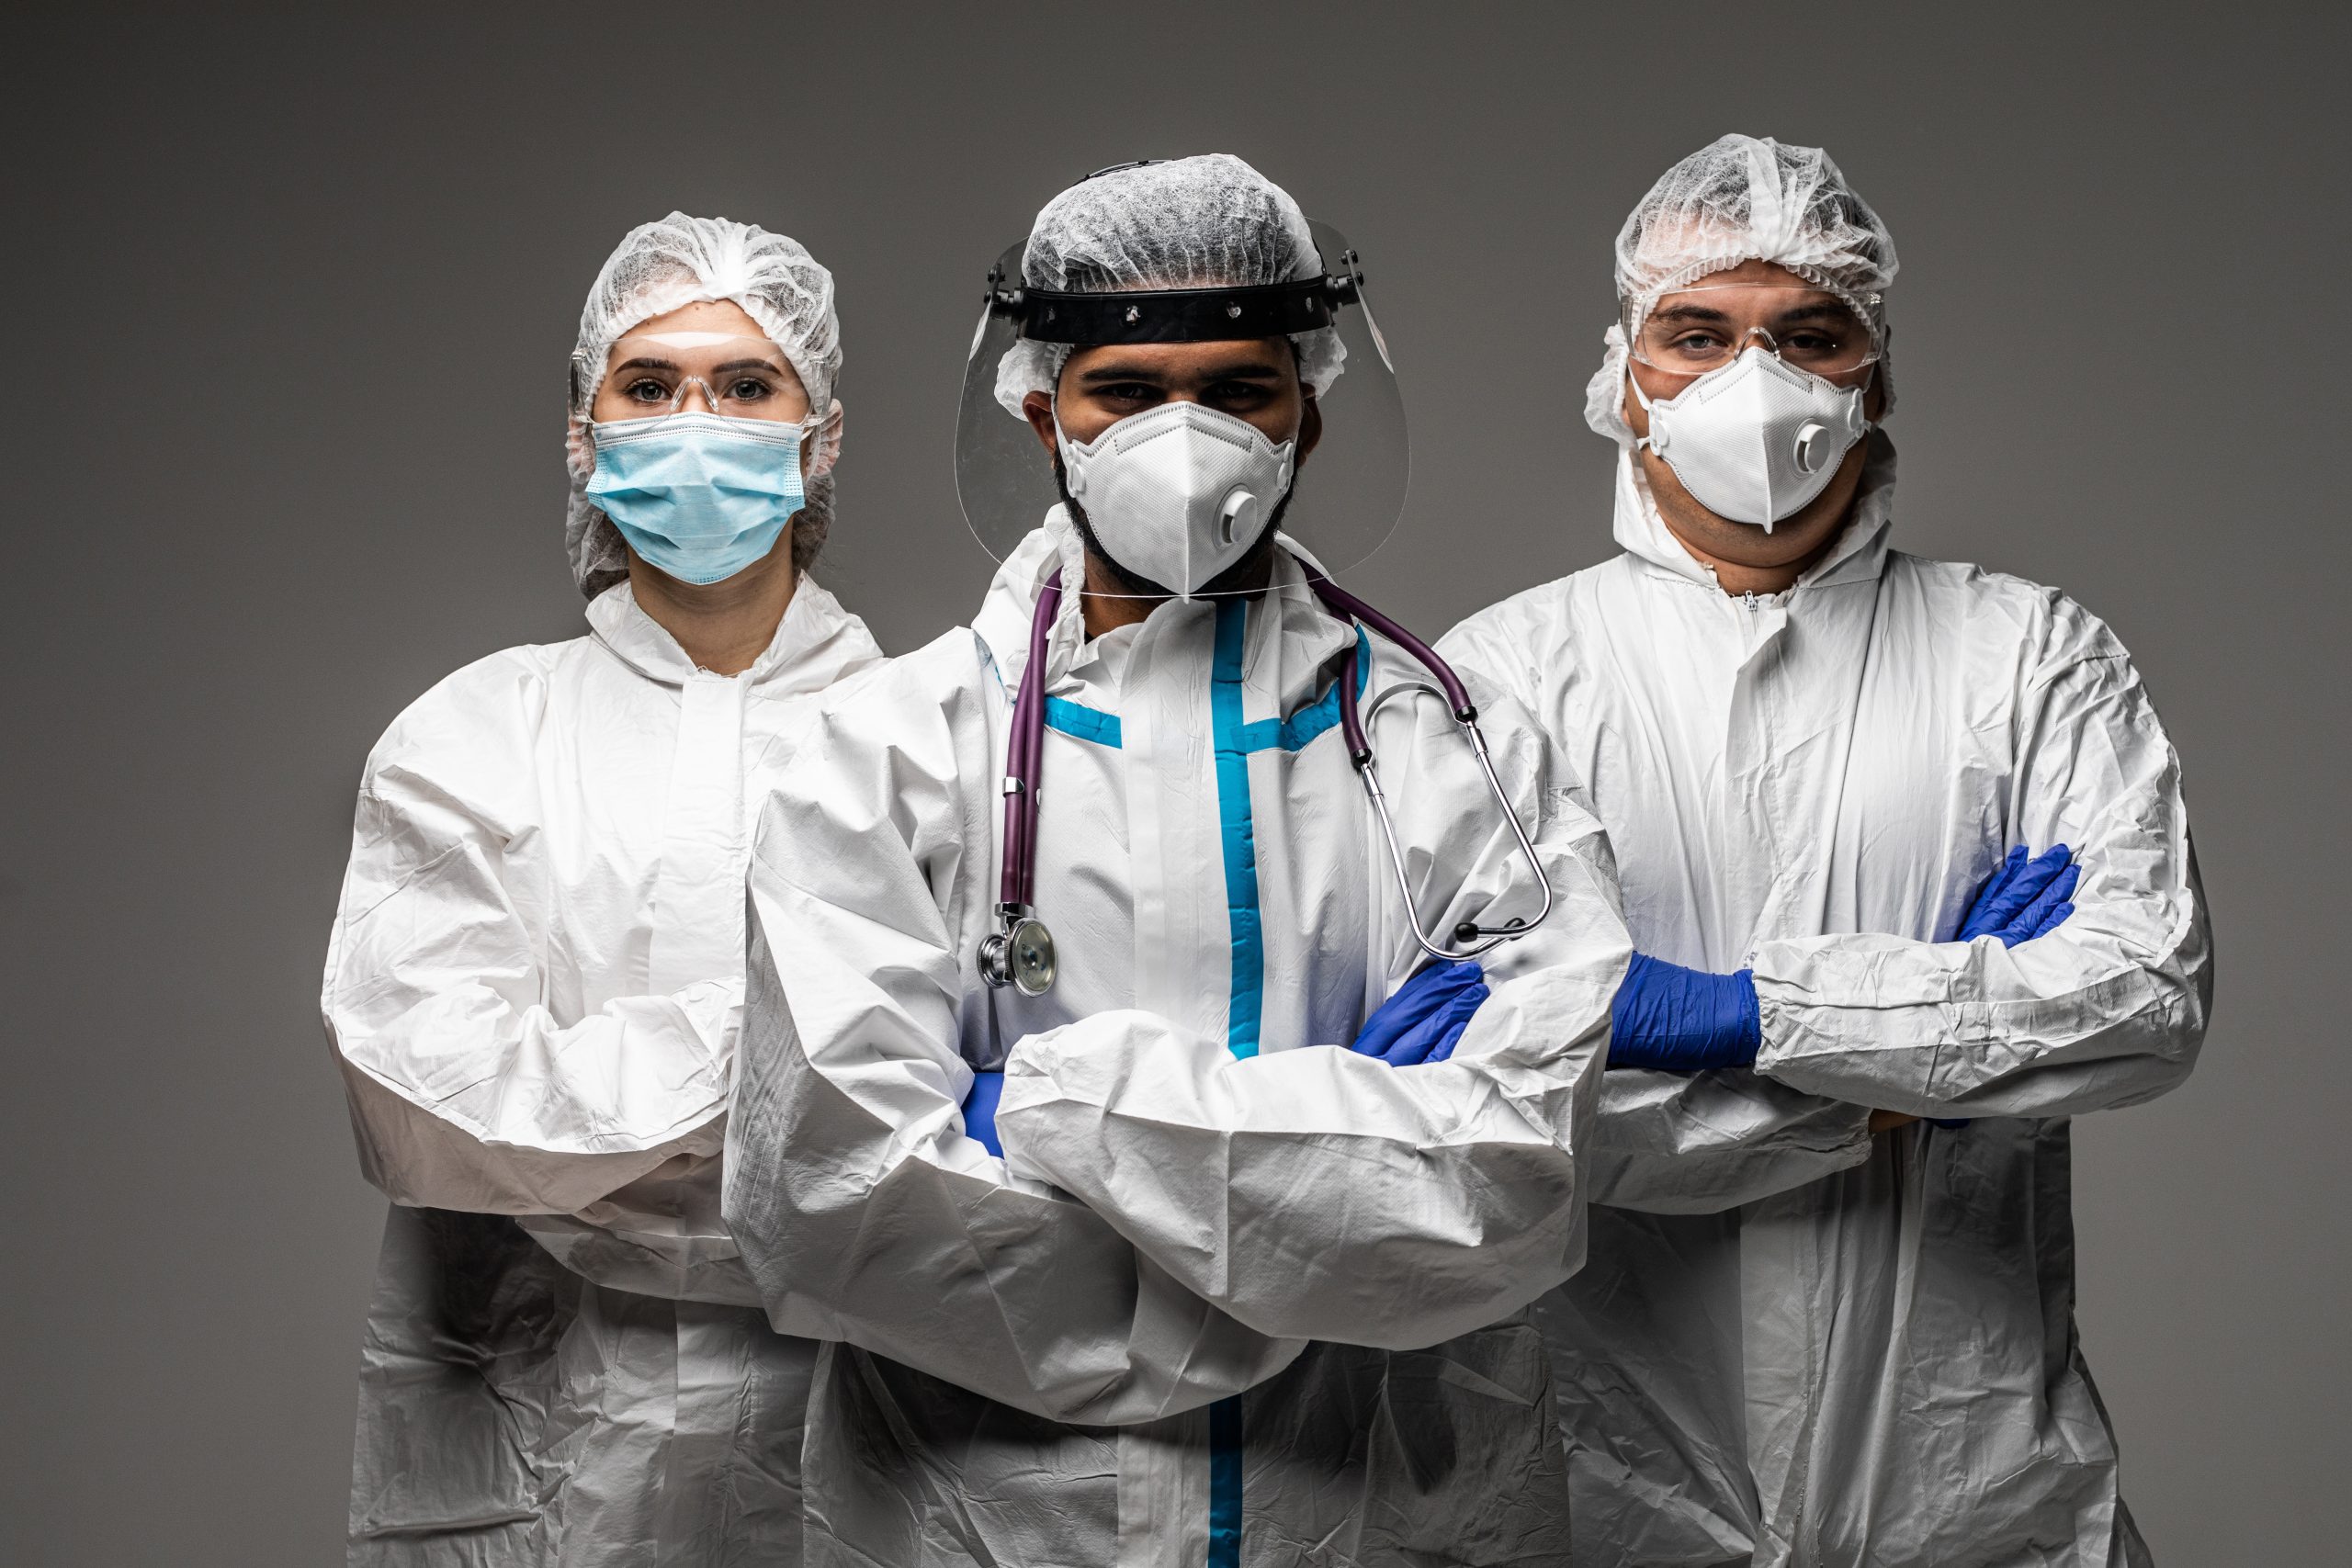 Doctors look to you wear the isolation gown or protective suits and surgical face masks in the control area to prevent the spread of coronavirus. Covid healthcare